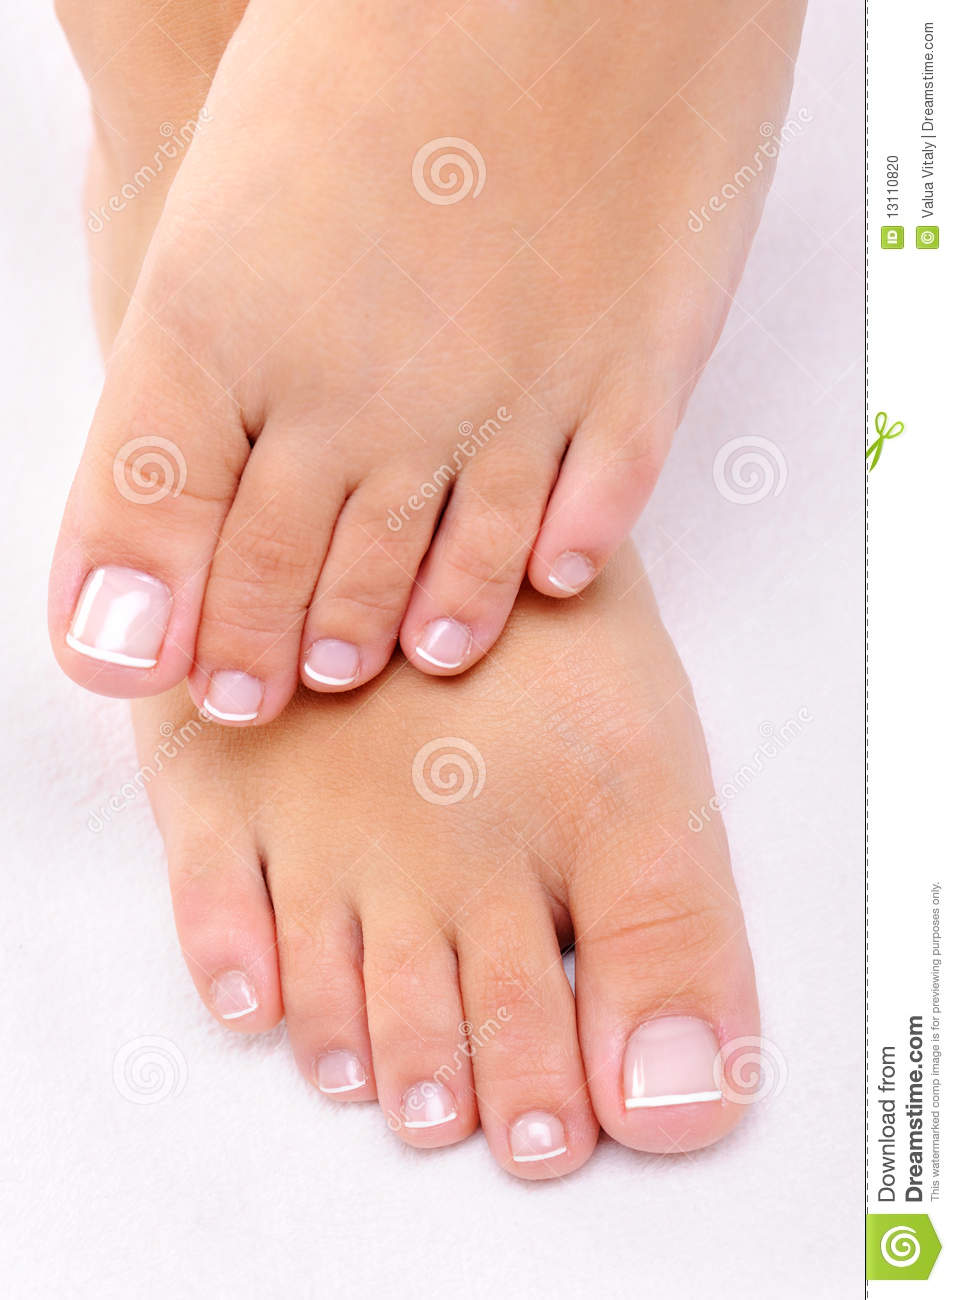 Beautiful Female Feet With The French Pedicure On A White Towel 